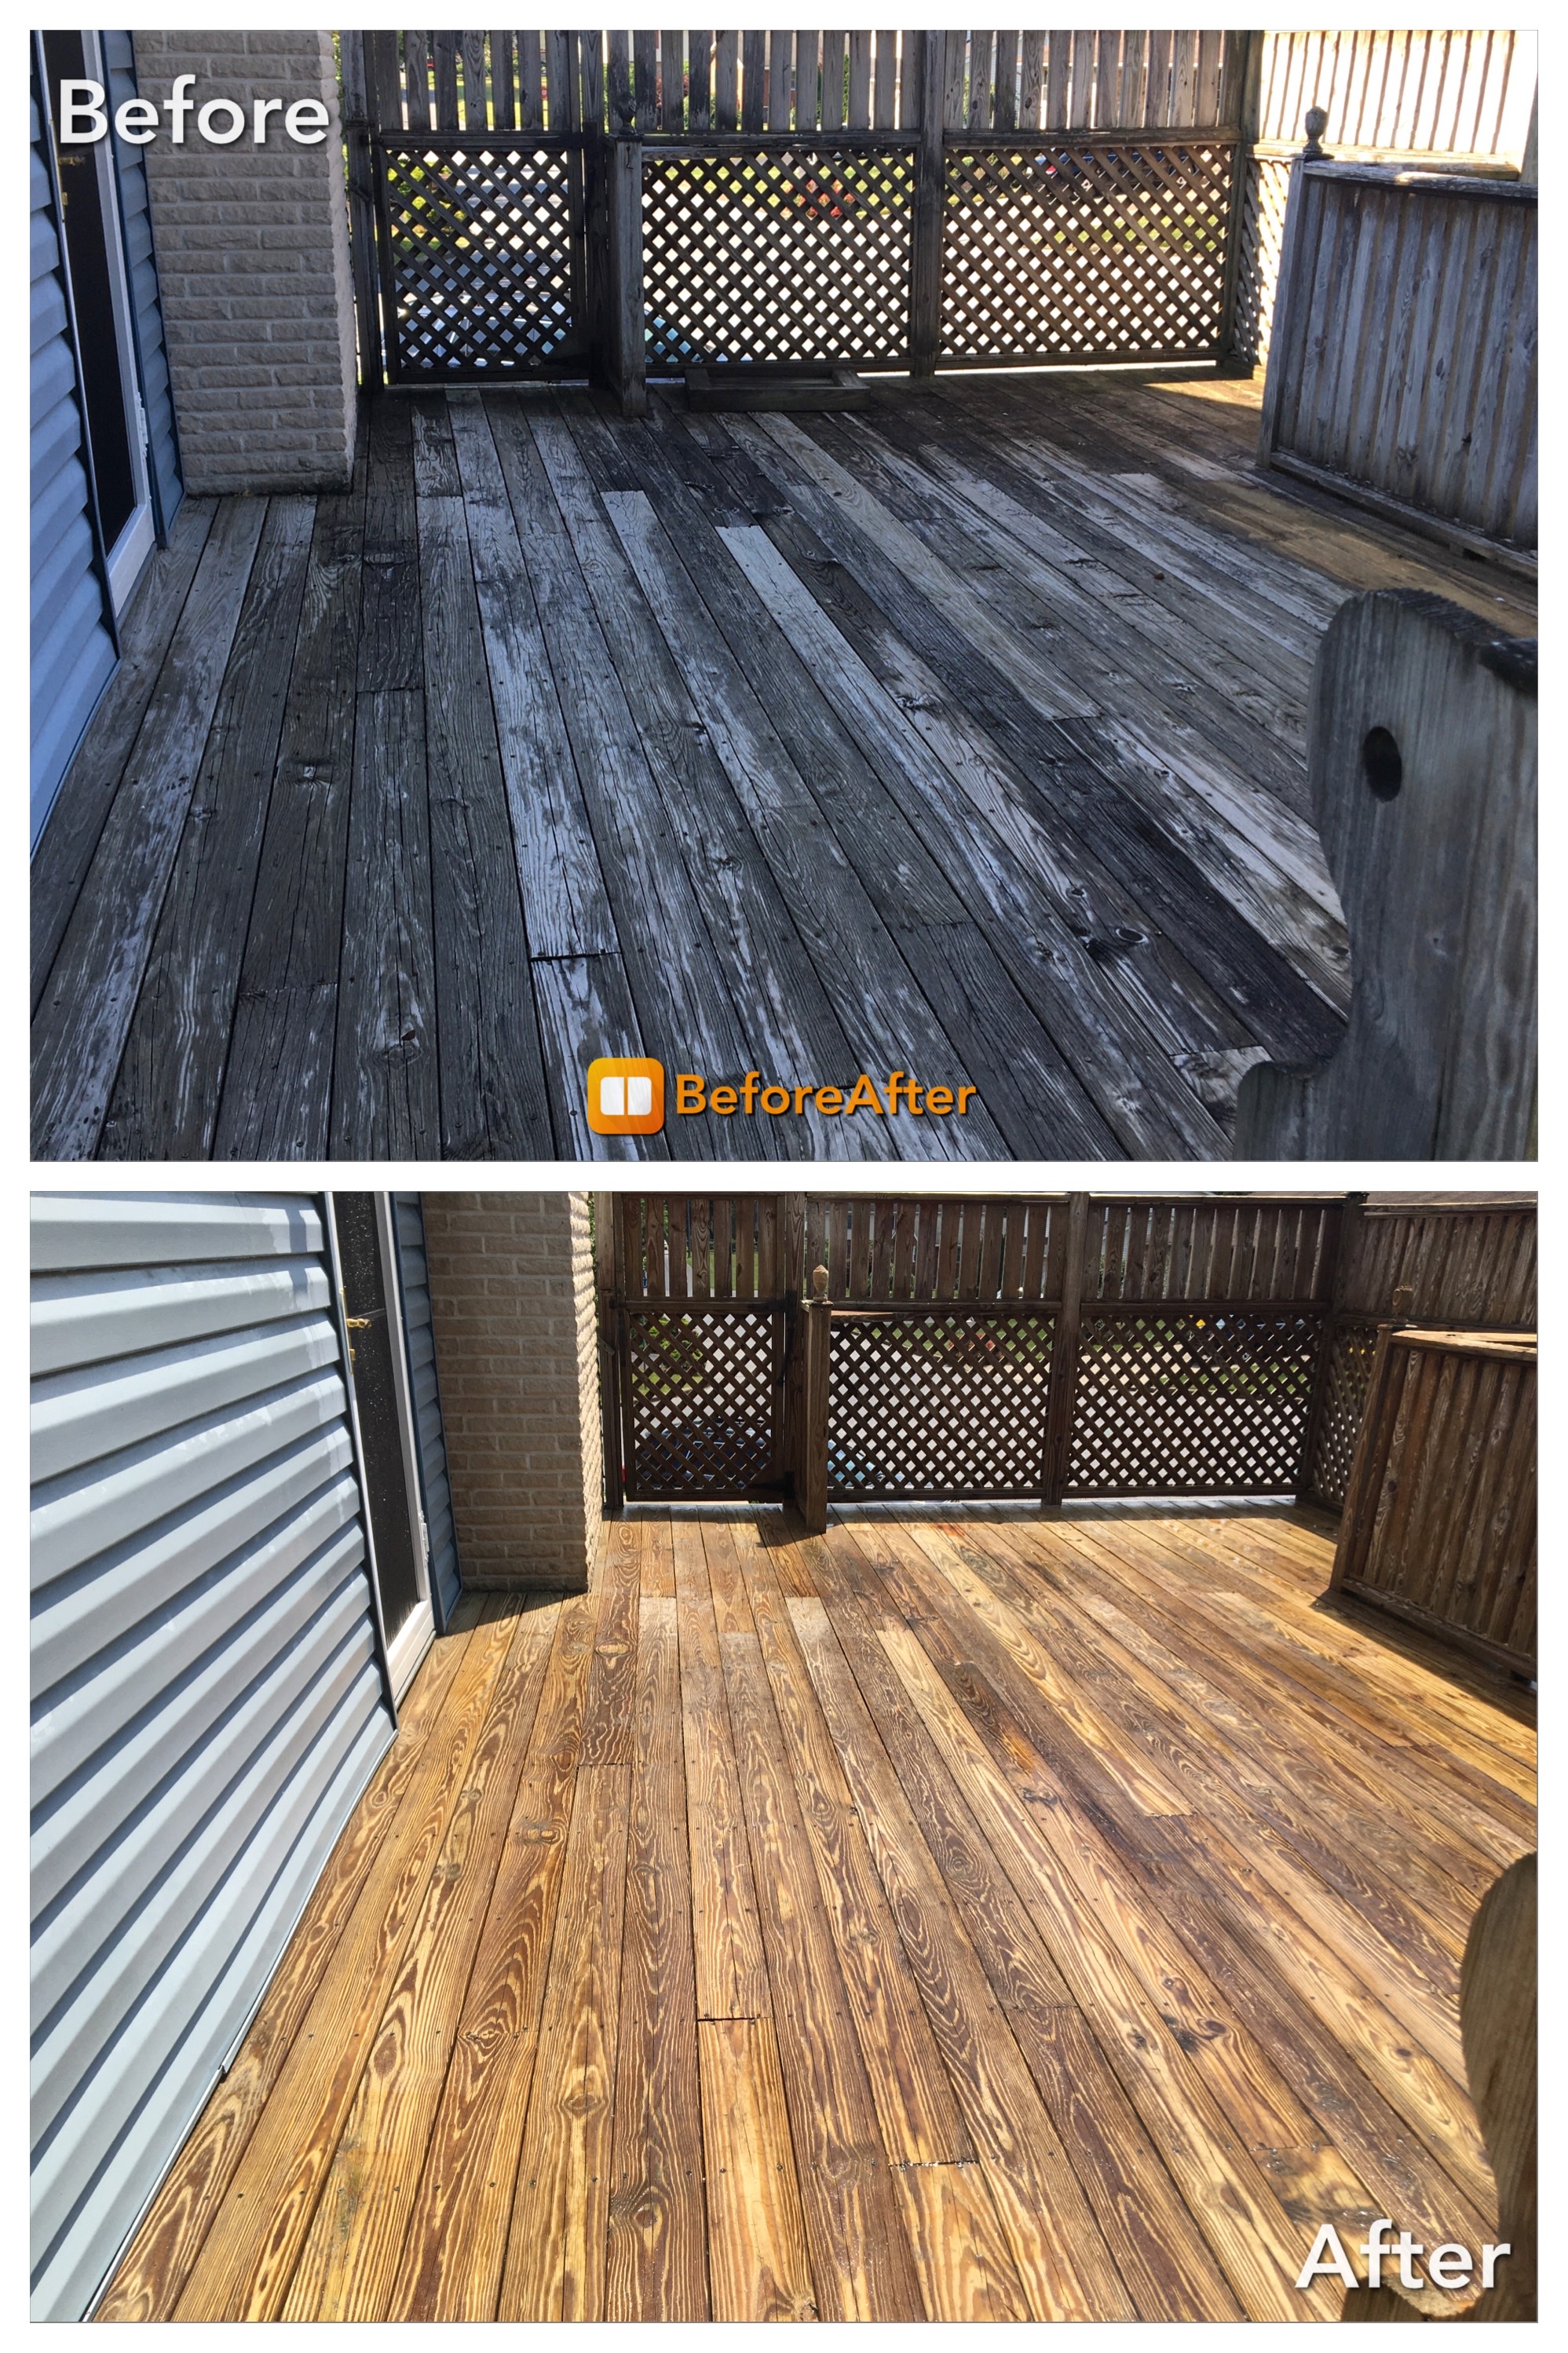 Top quality deck cleaning in Easton PA